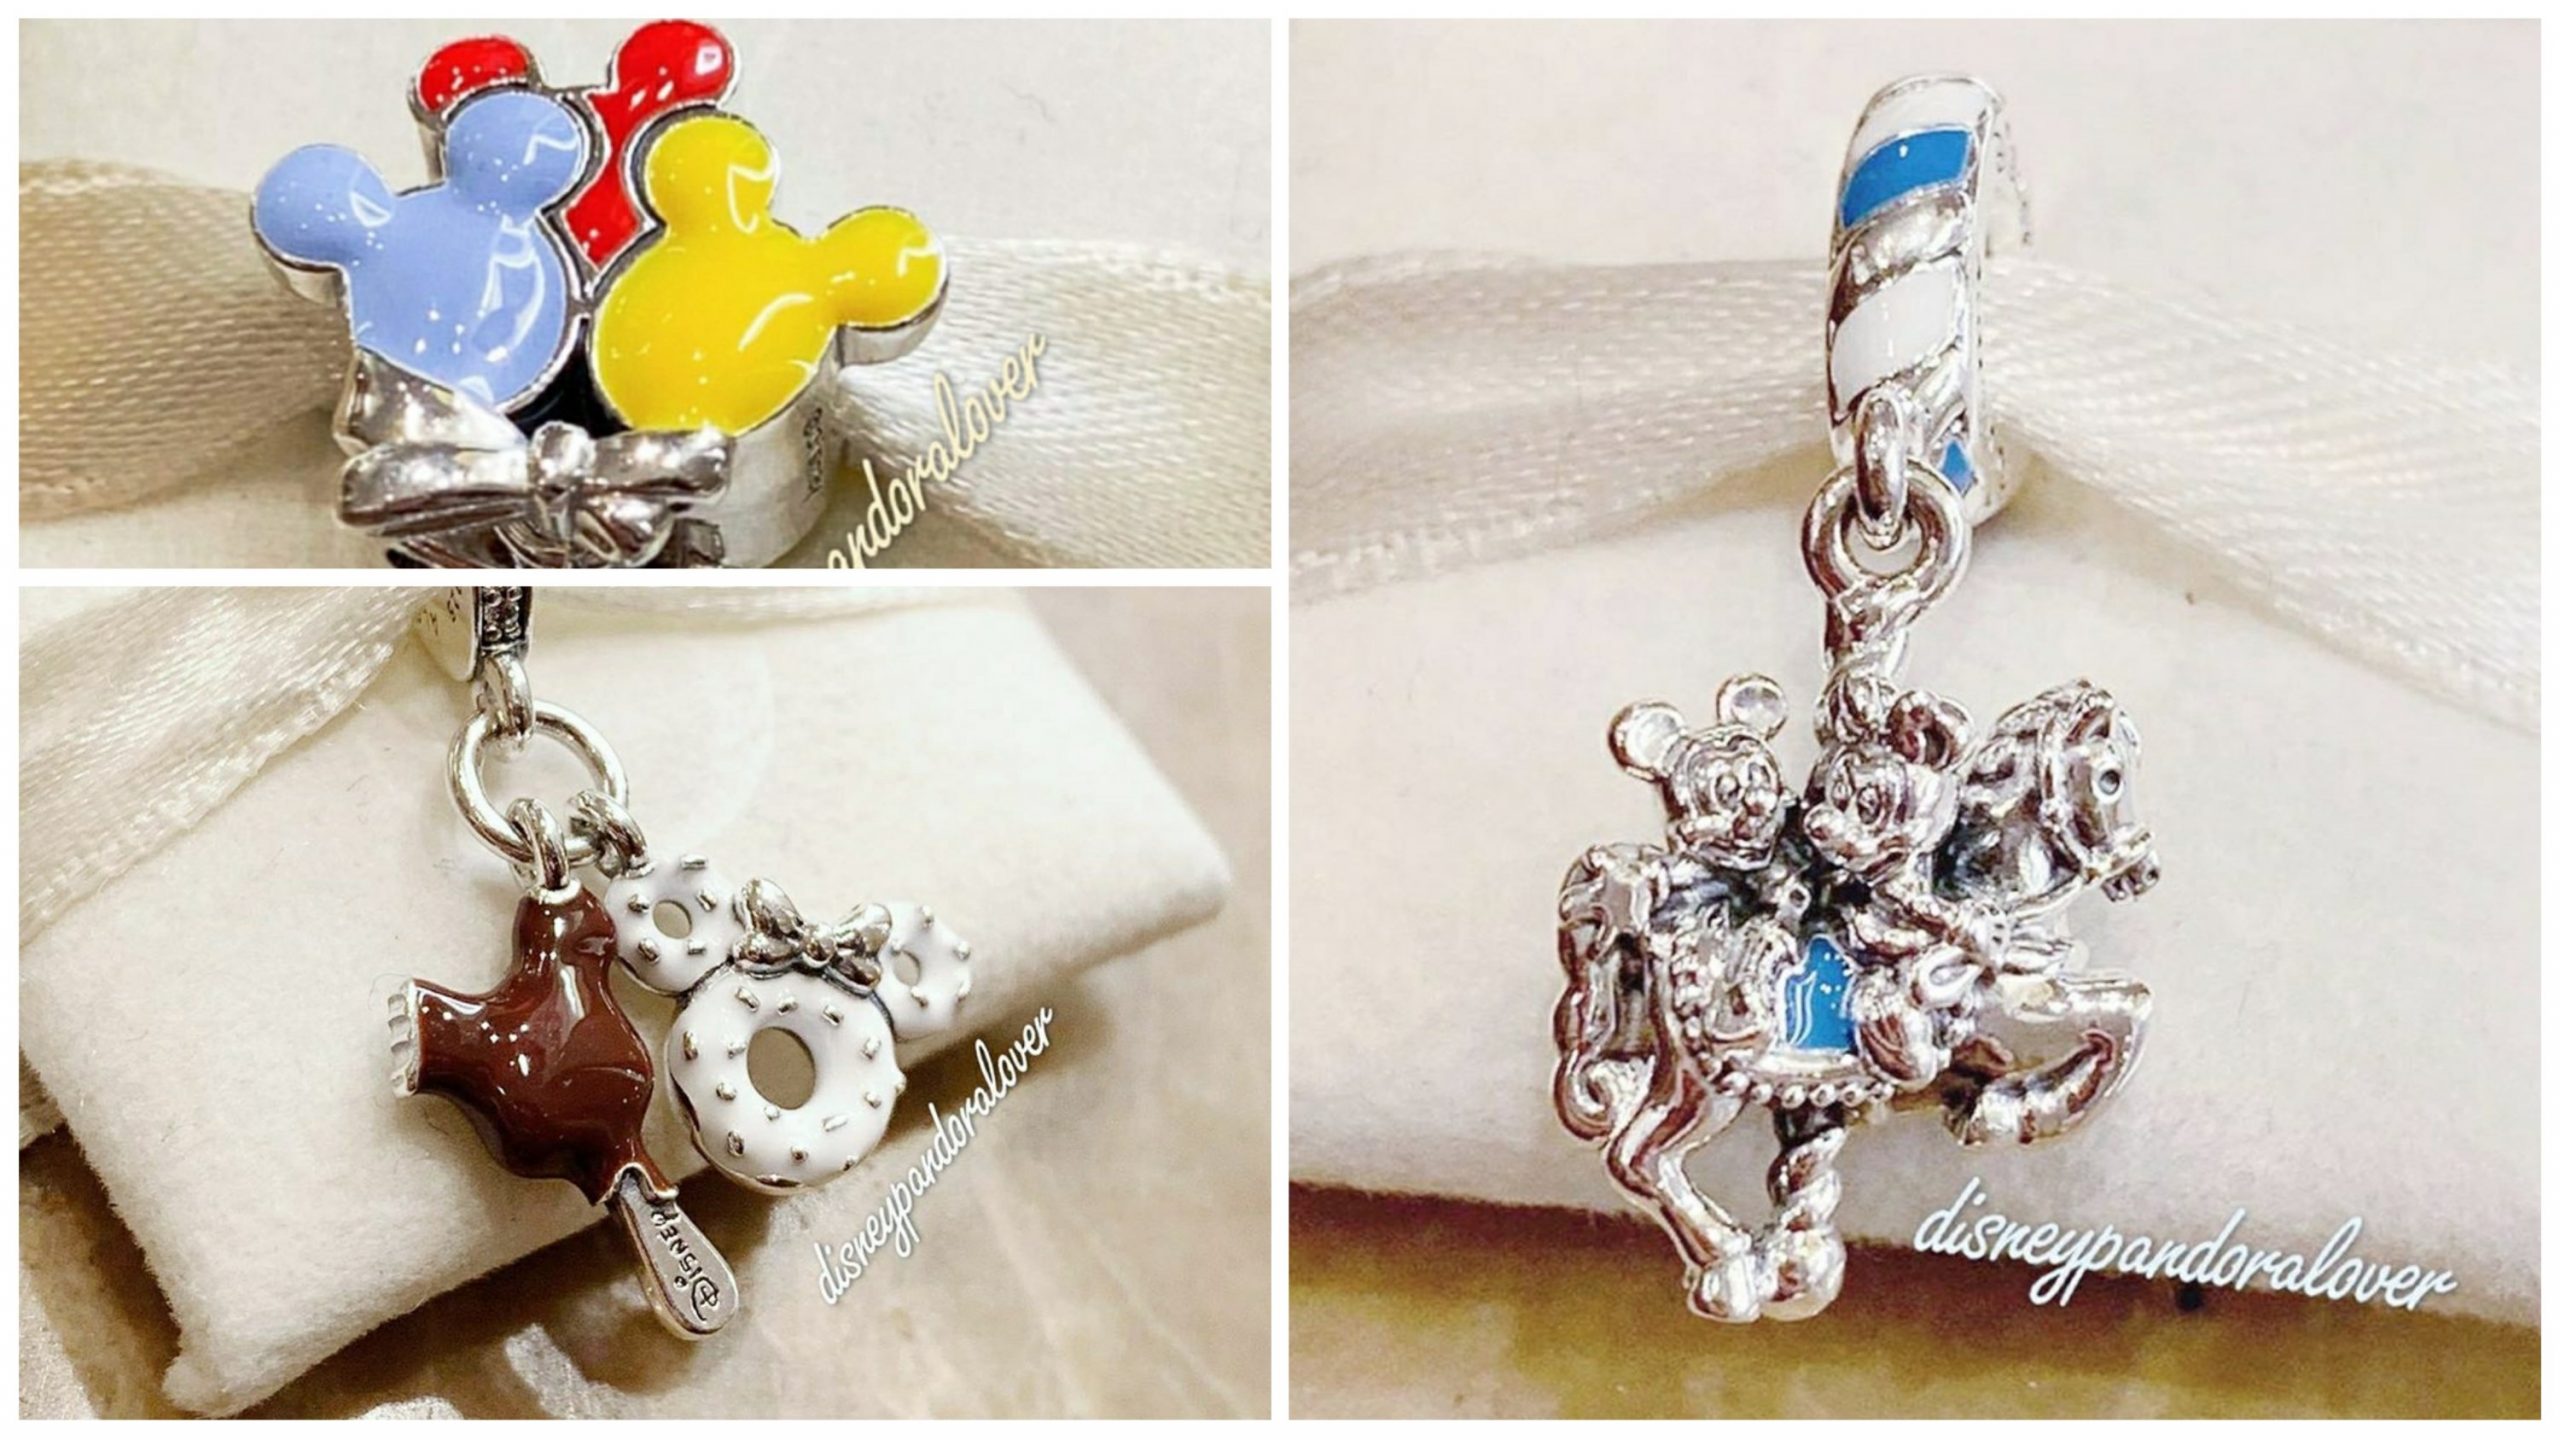 New 2020 Disney Park Exclusive Pandora Charms Coming To Celebrate My